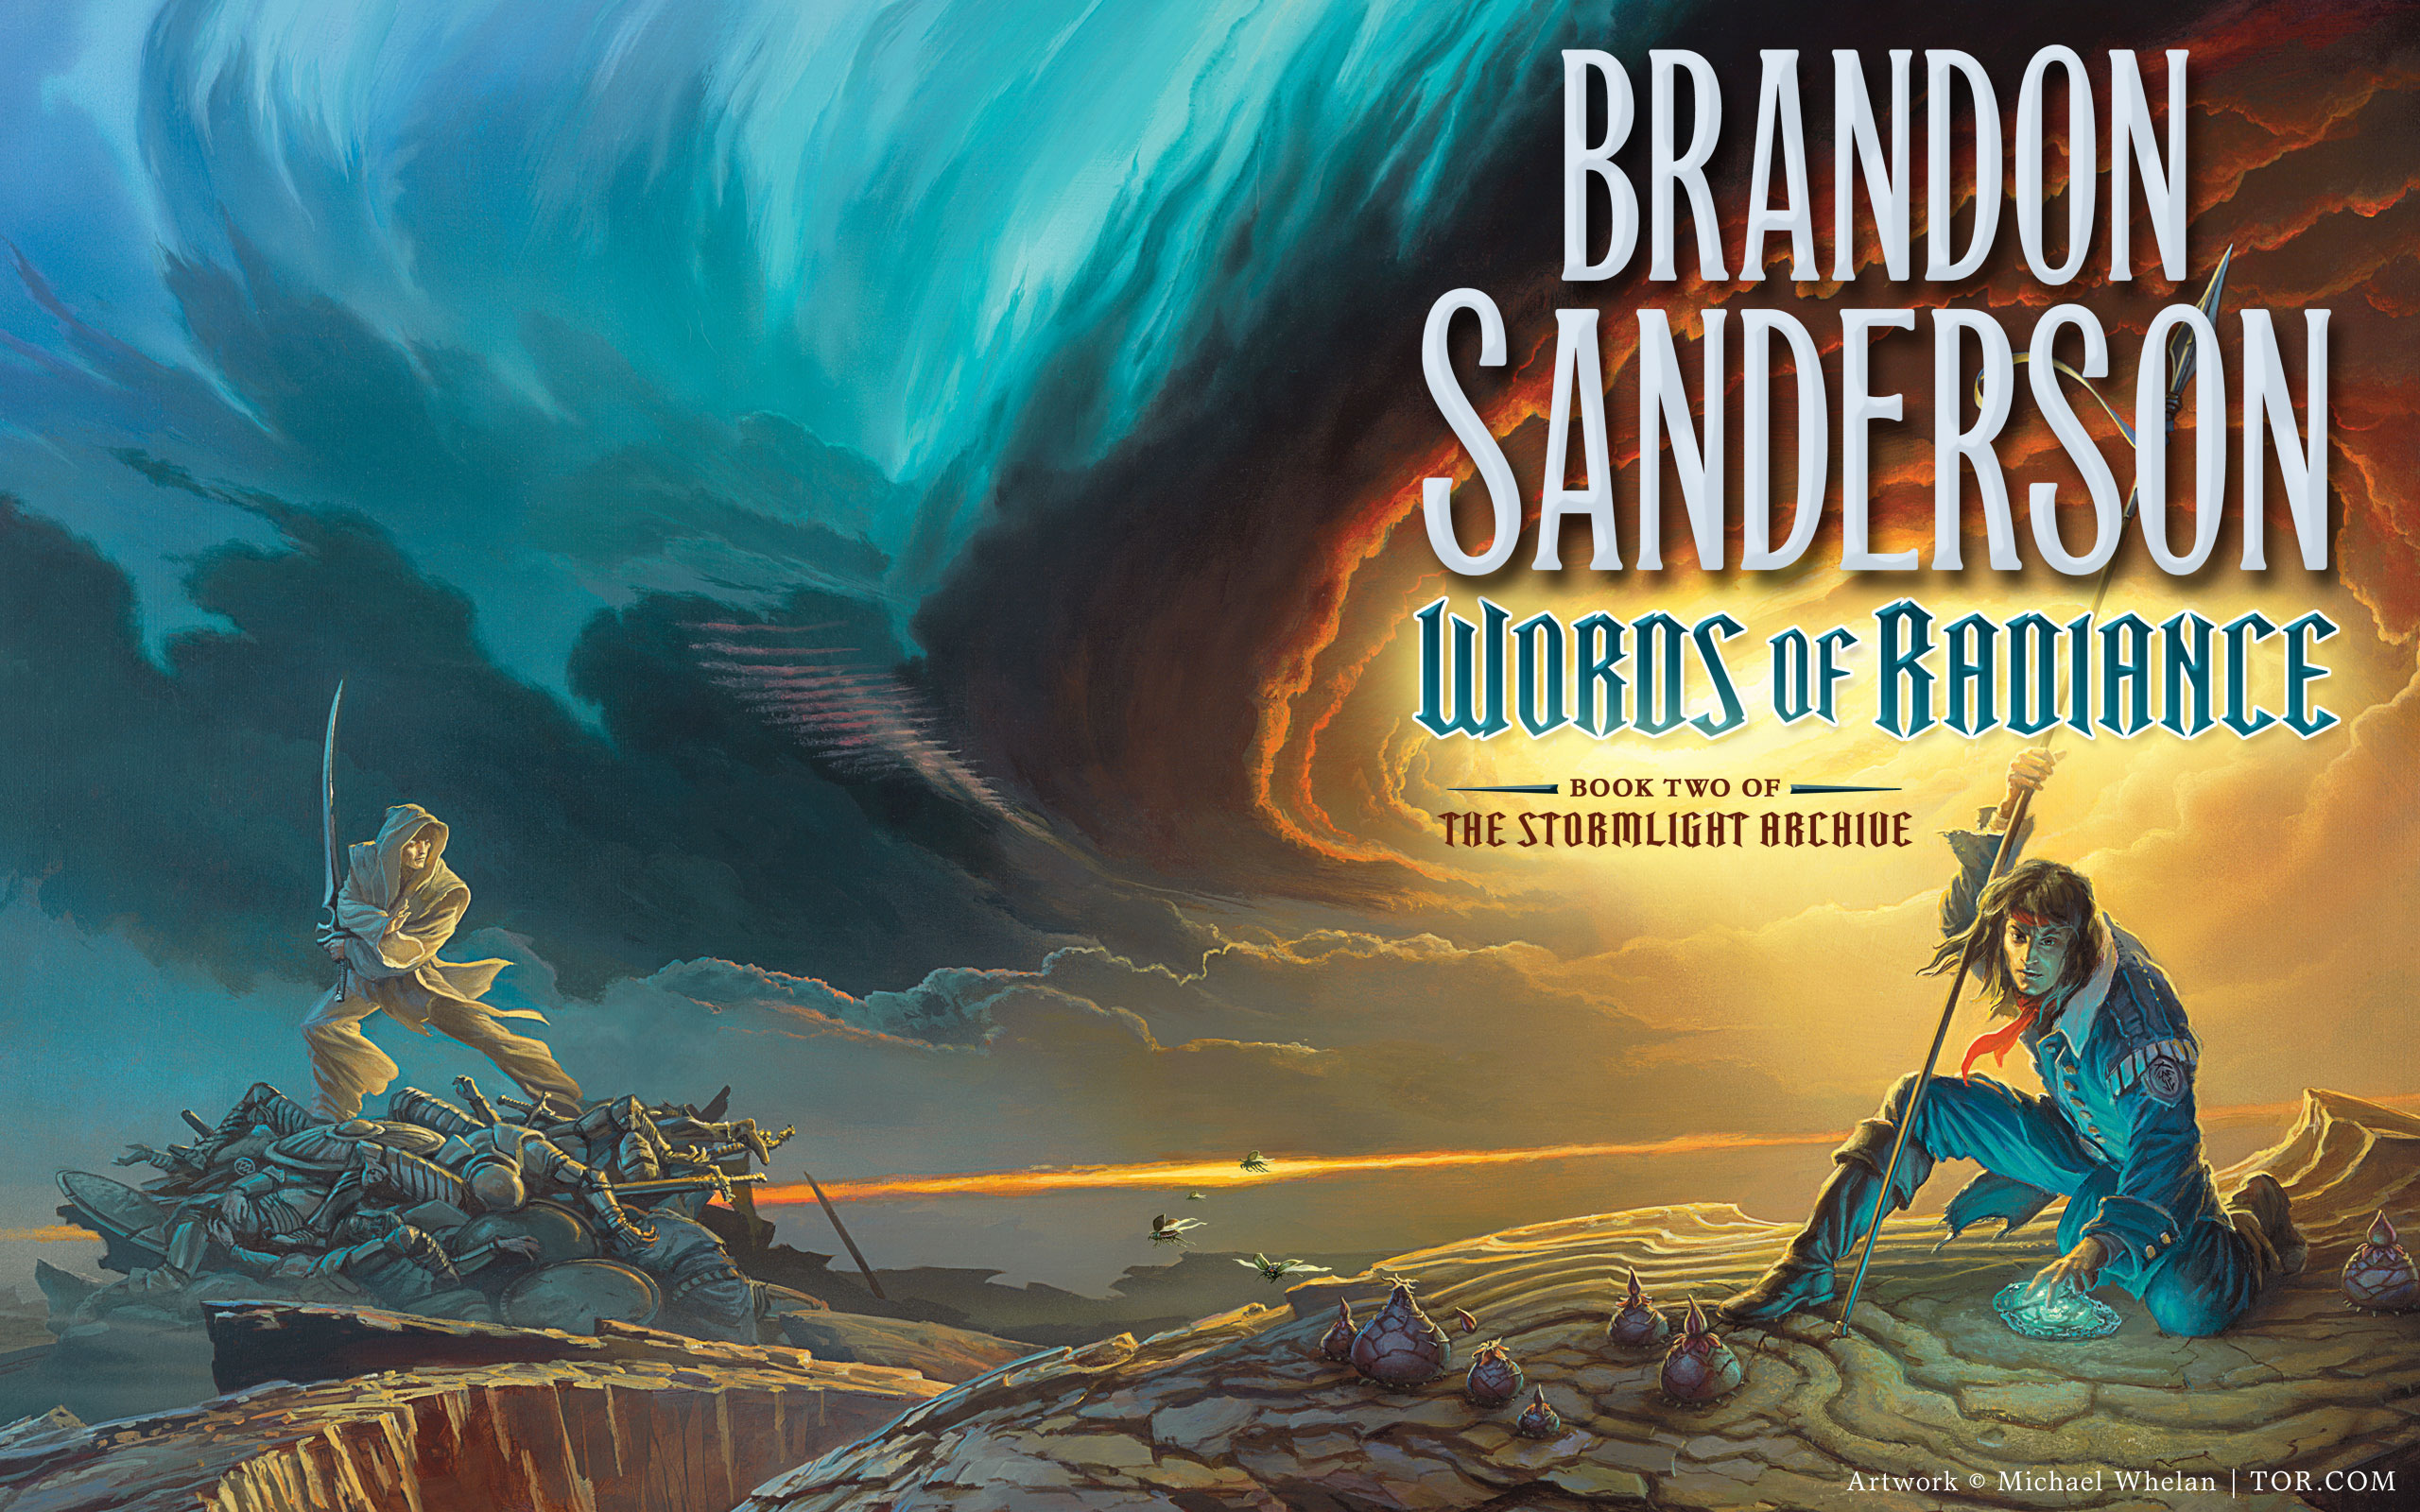 Words of Radiance - Wikipedia